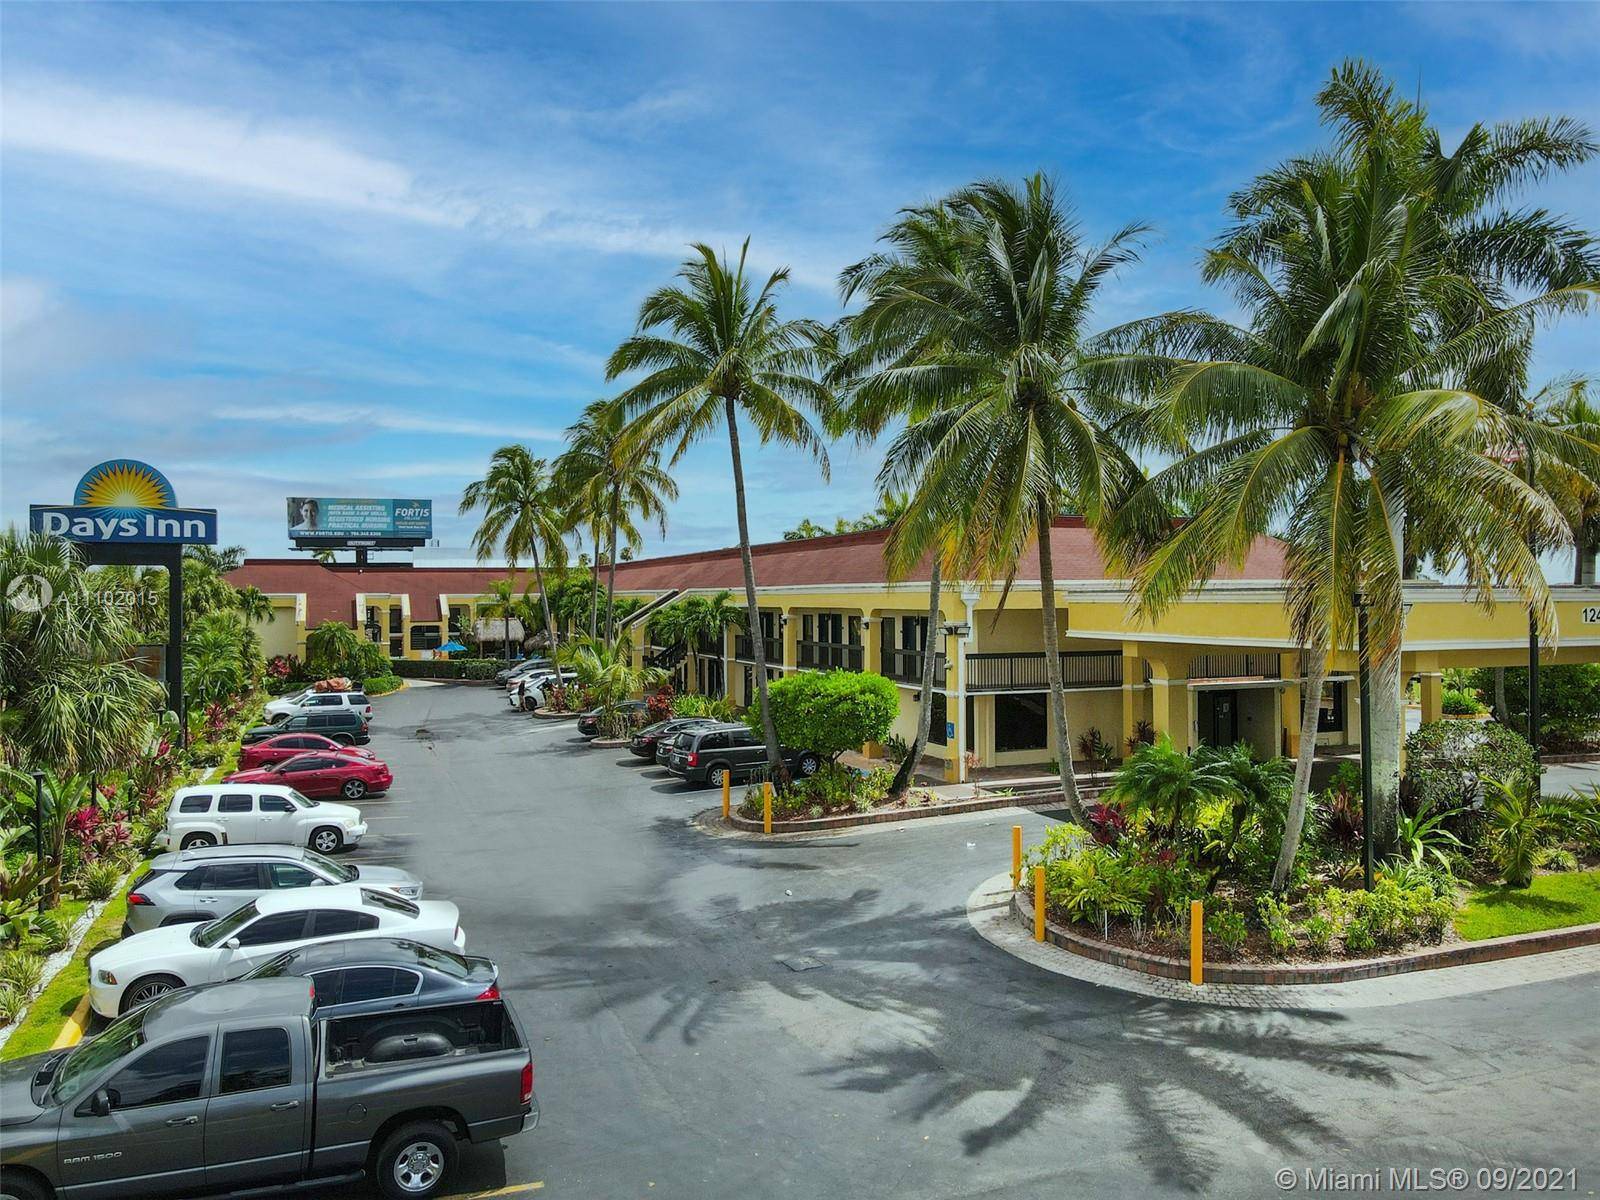 Bravo and Partners Realty is please to present this Days Inn by Wyndham Florida City.